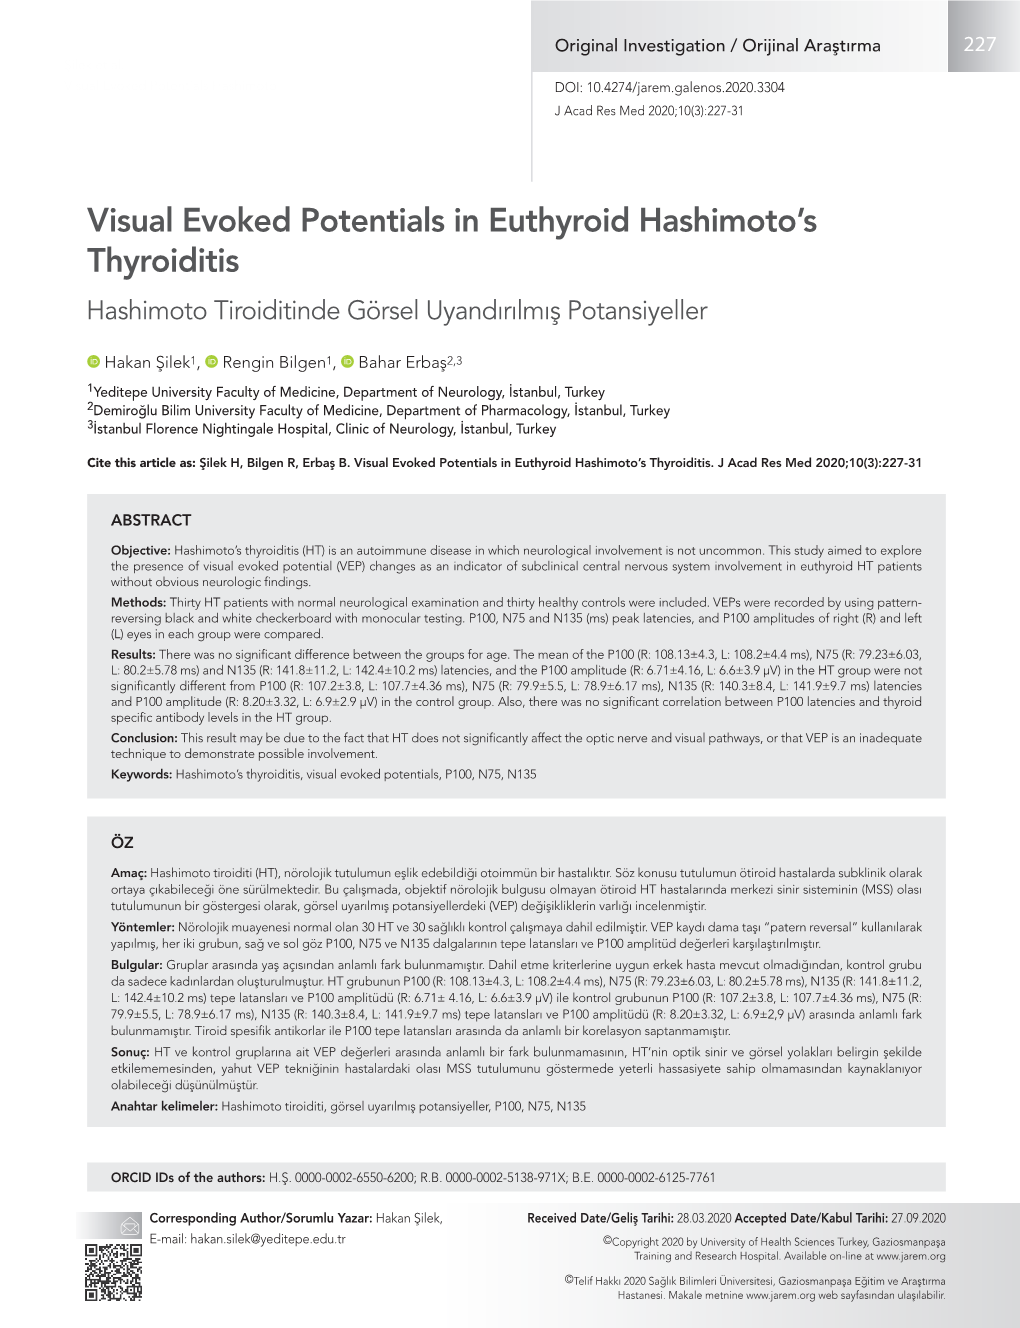 Visual Evoked Potentials in Euthyroid Hashimoto's Thyroiditis